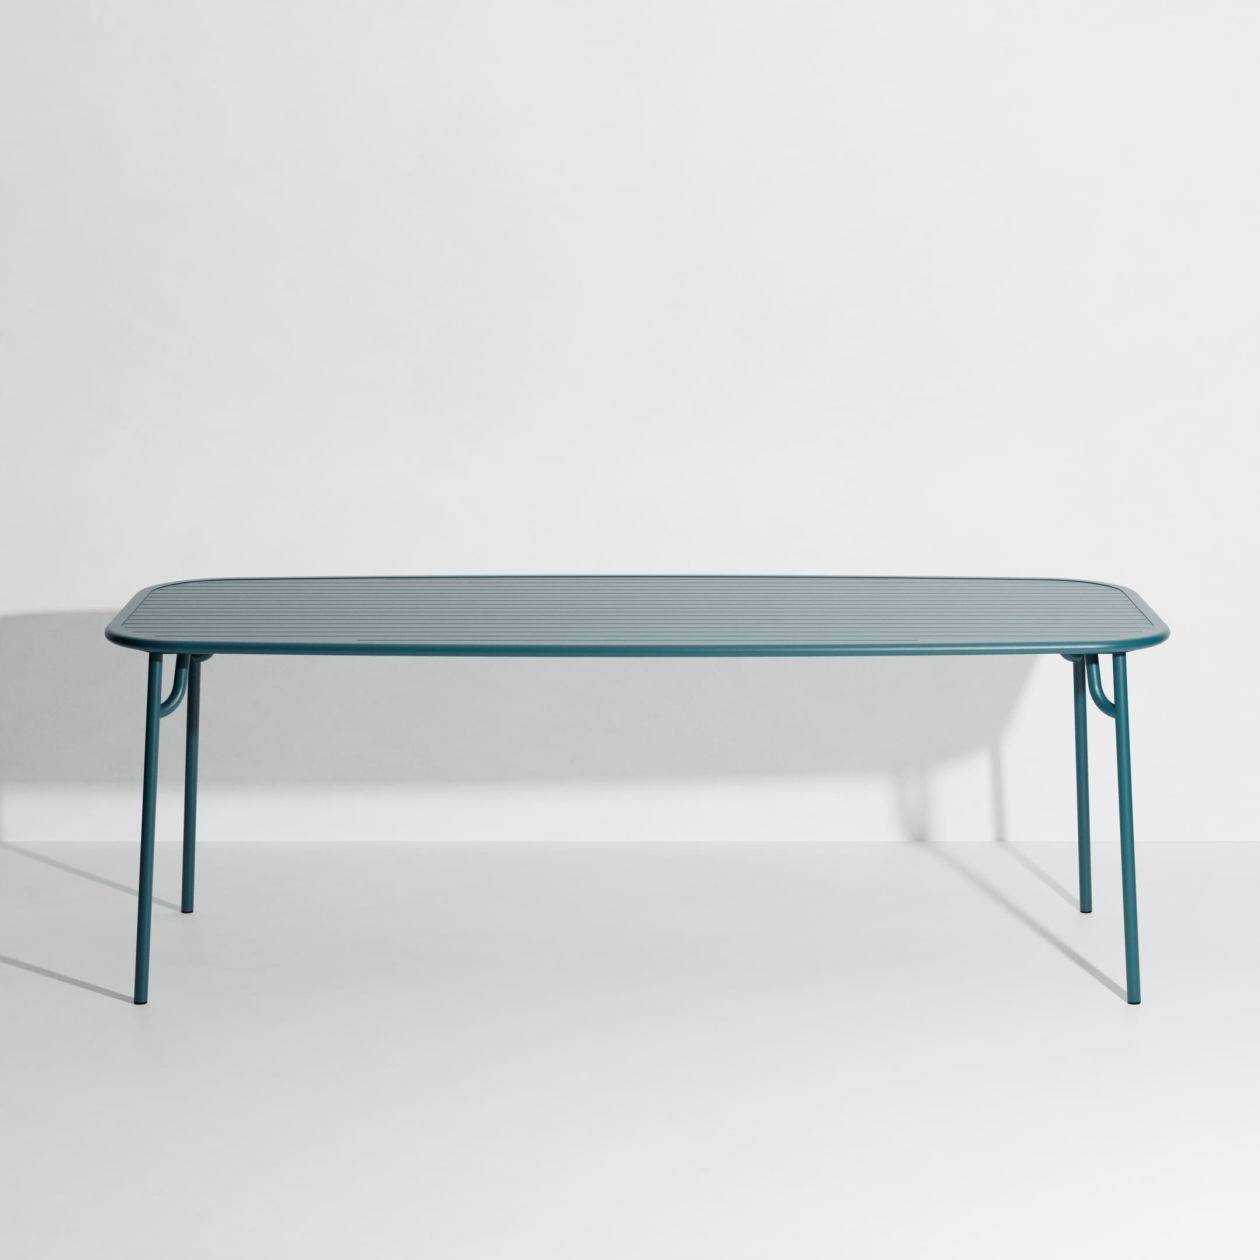 Week-End Large Rectangular Dining Table with slats - Ocean blue